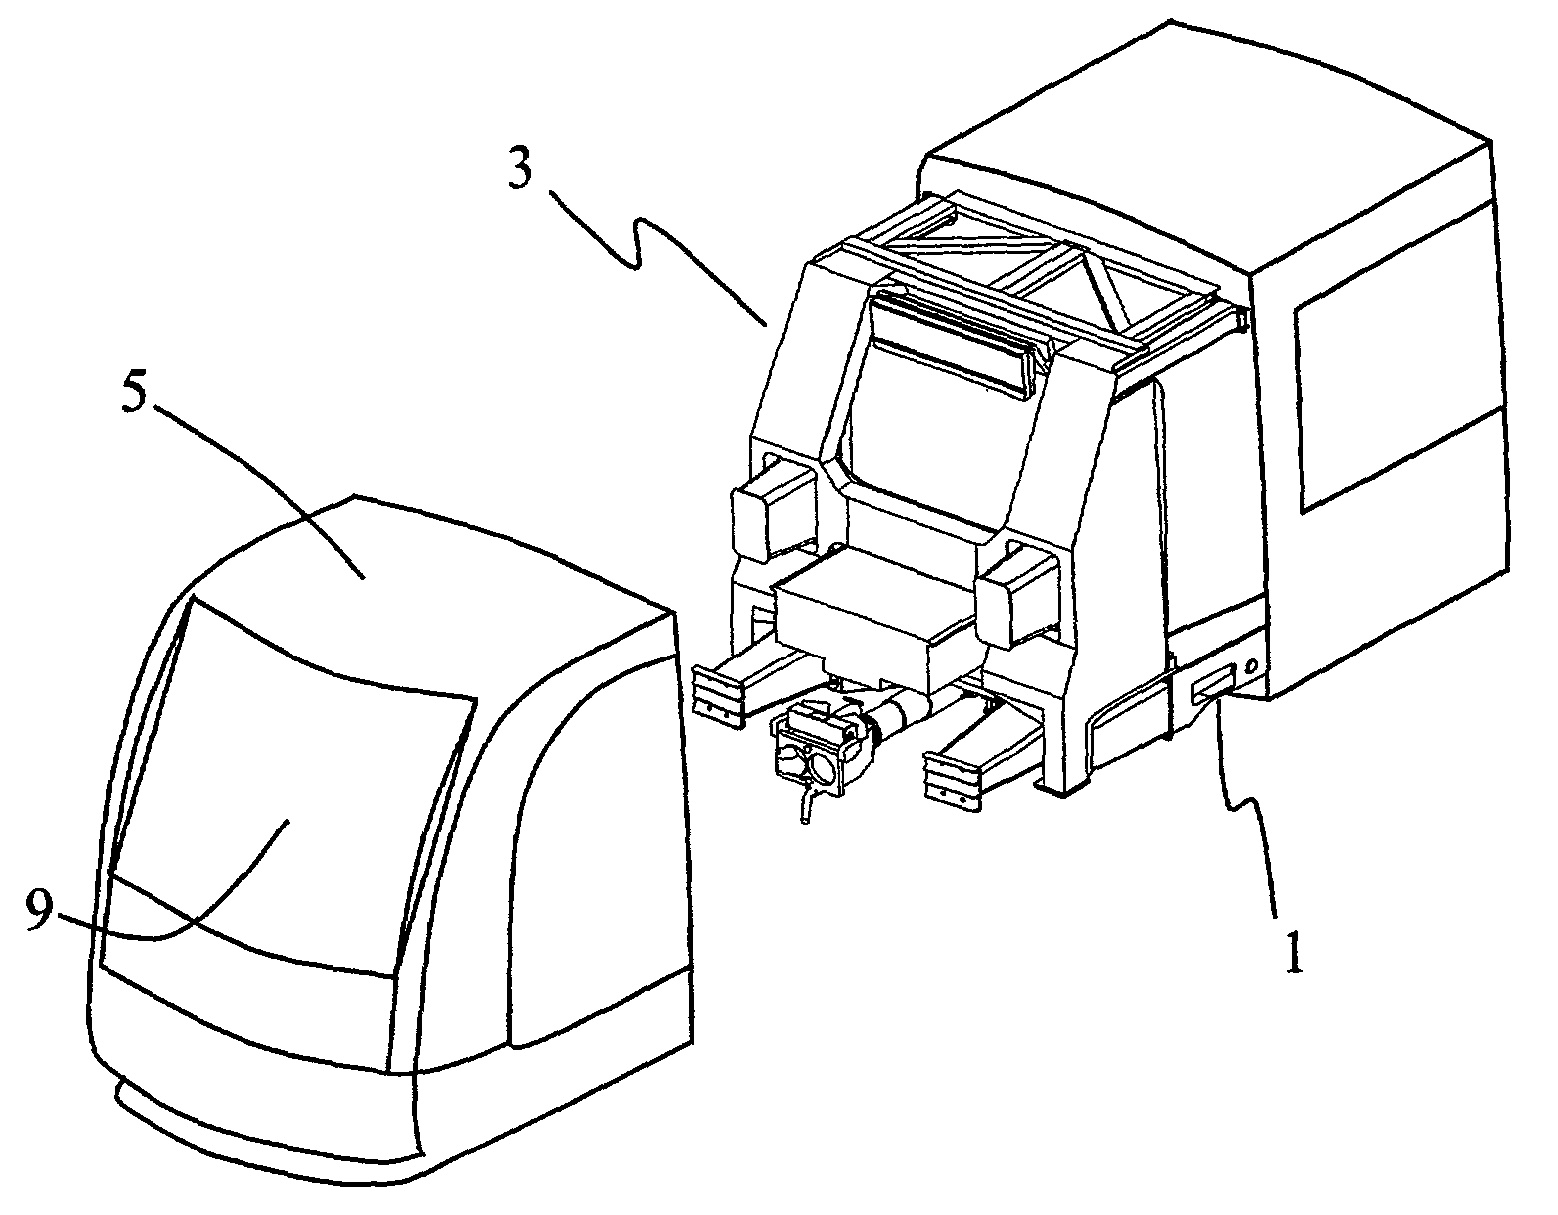 Rail vehicle having a driver's cab provided with an energy-absorbing structure adapted to cope with a collision above the frame of the vehicle